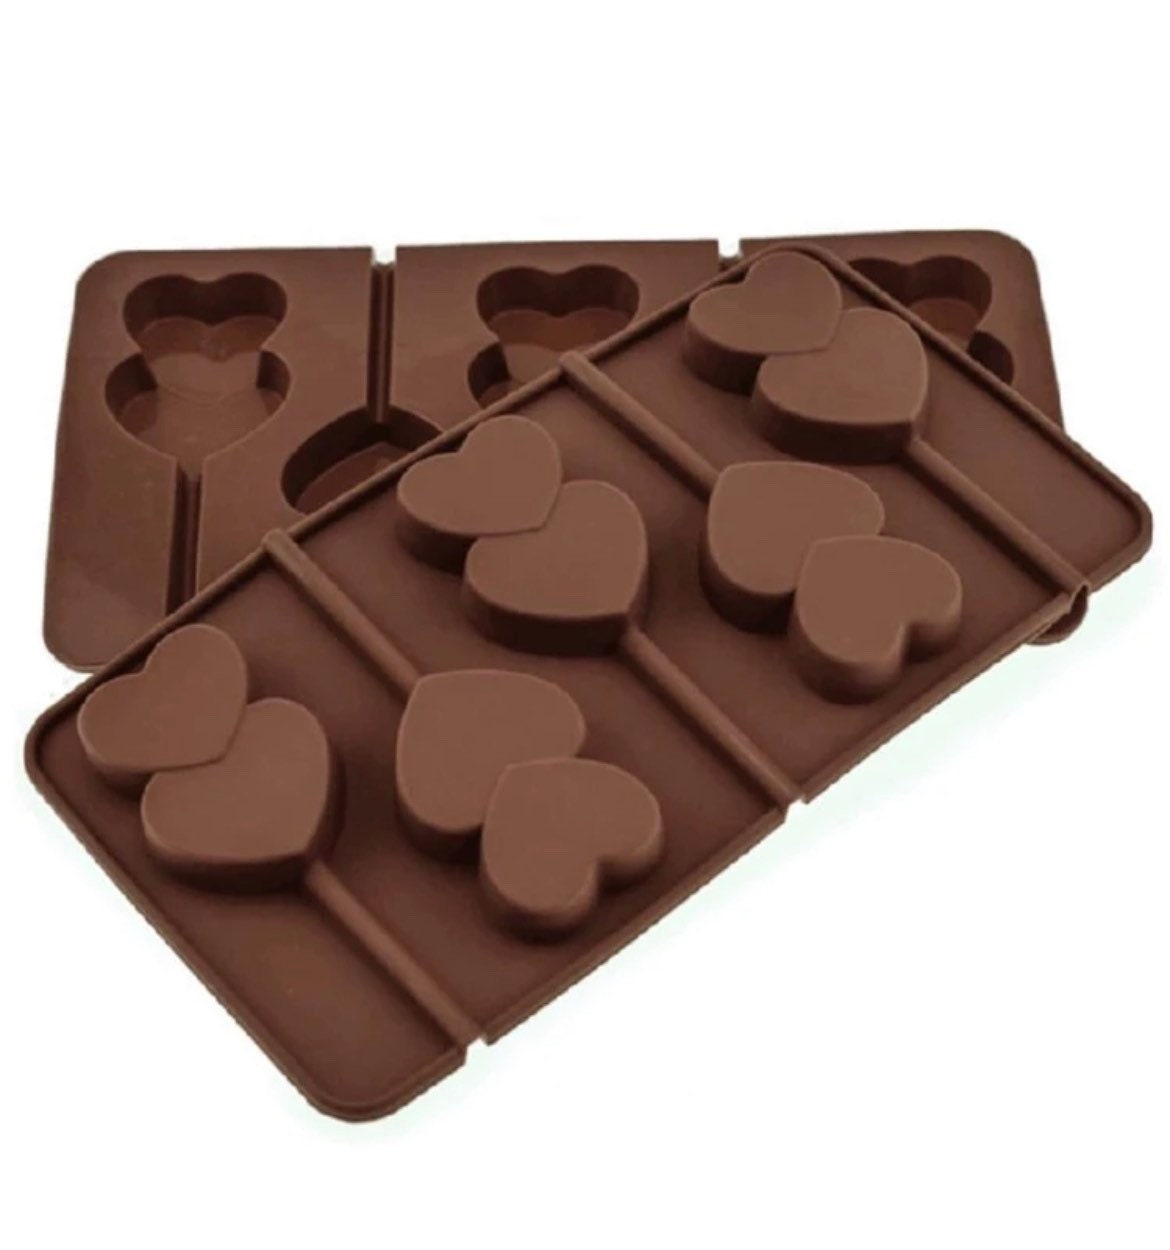 mostsom Silicone Lollipop Molds,Chocolate Candy Mold Lollypop